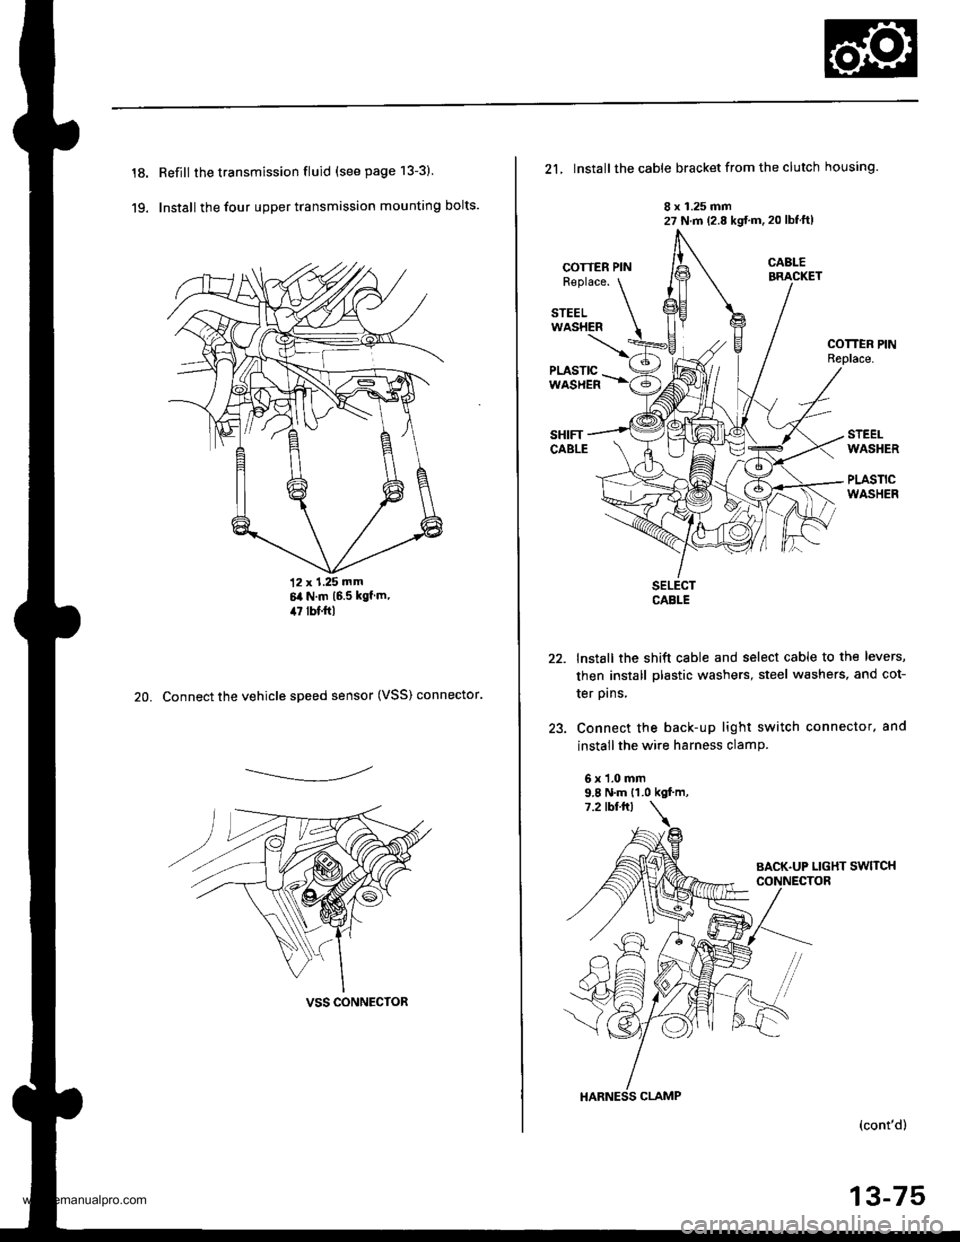 HONDA CR-V 1997 RD1-RD3 / 1.G Workshop Manual 
18.
19.
Refill the transmission fluid (see page 13-3)
Install the four upper transmission mounting bolts.
12 x 1.25 mm6it N.m 16.5 kgf m,il7 lbf.ftl
20. Connect the vehicle speed sensor (VSS) connect